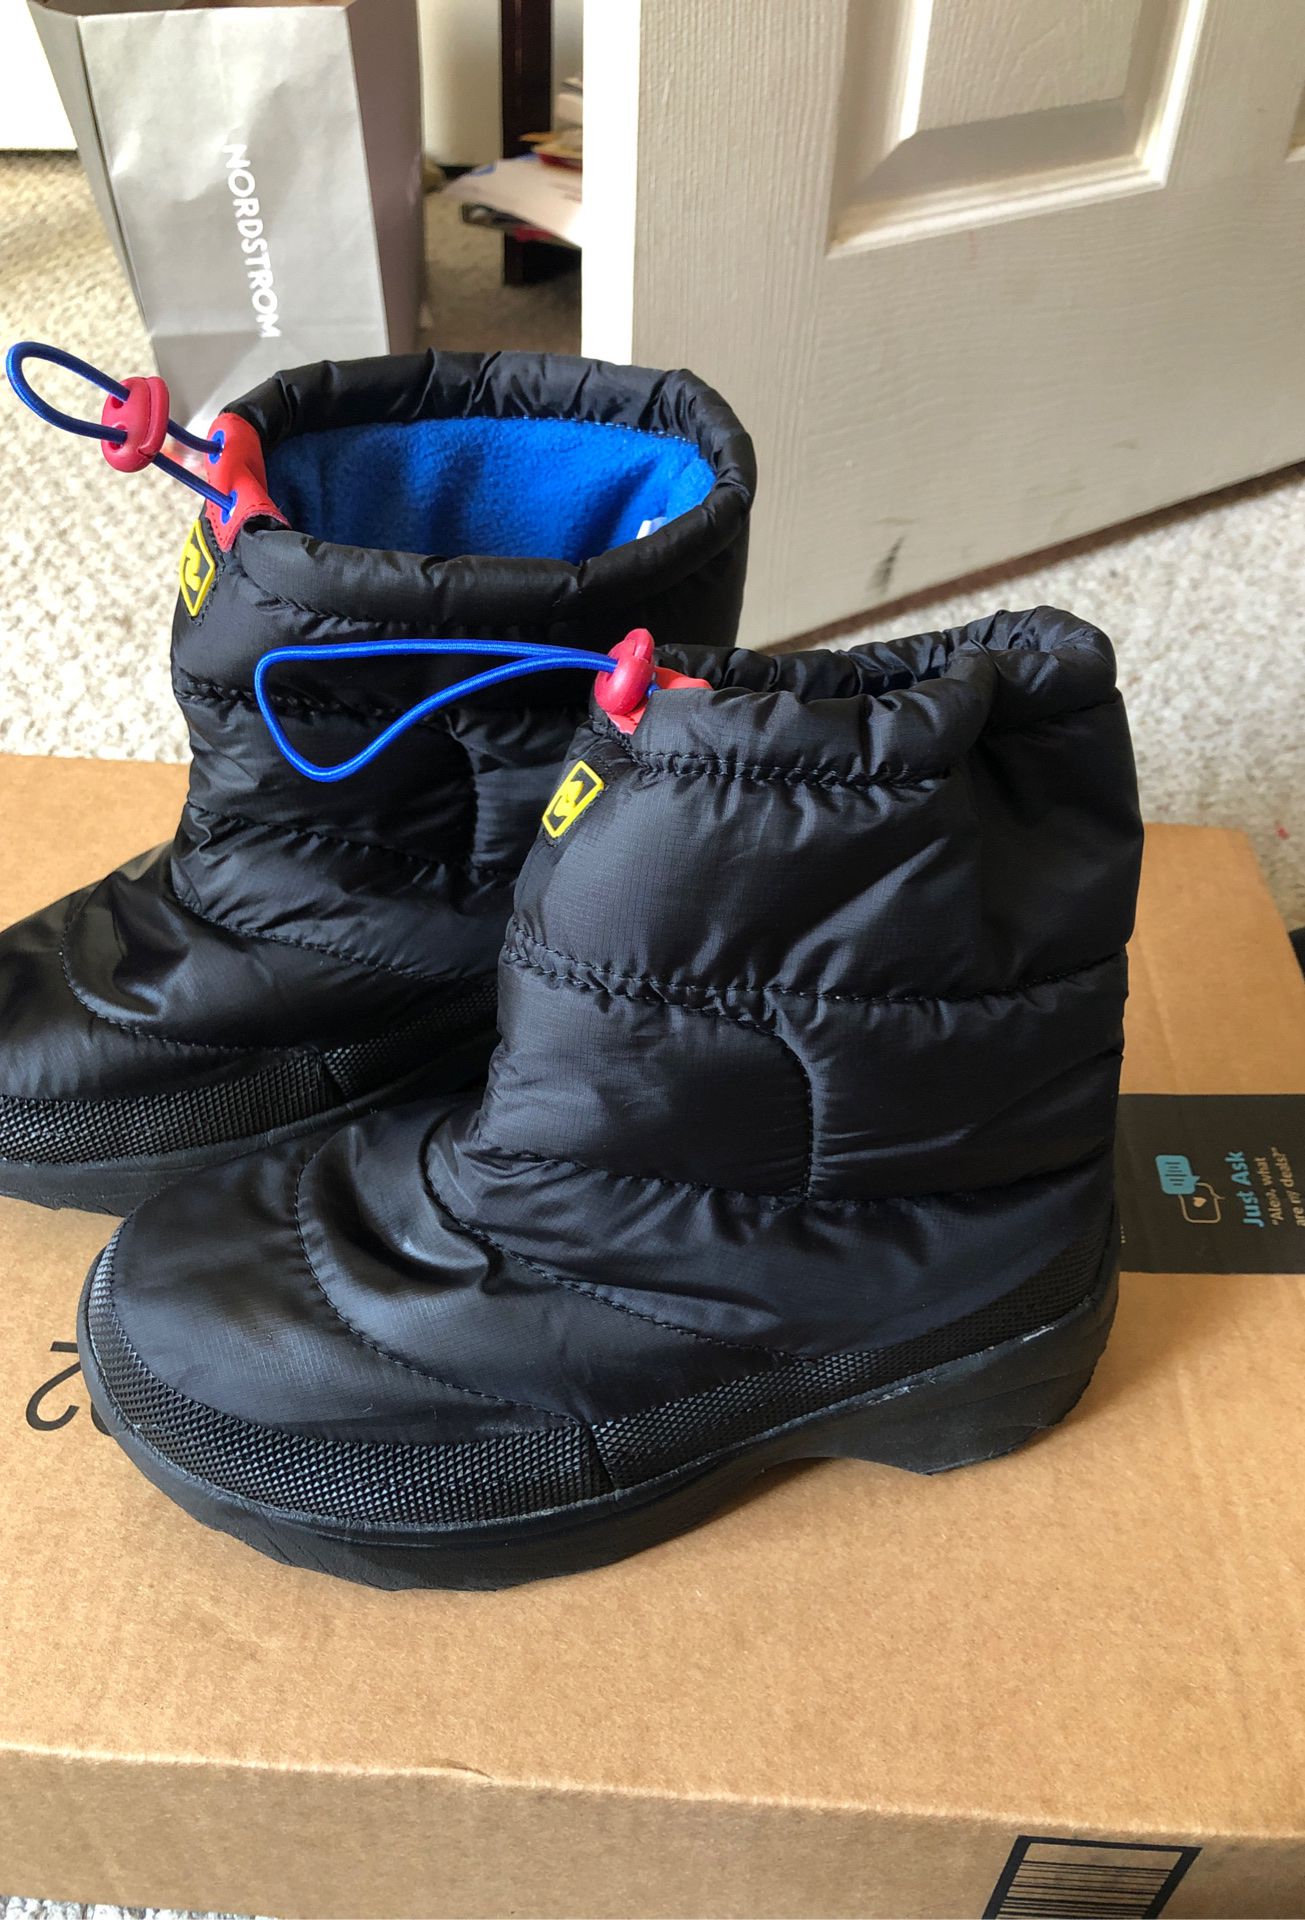 Kids waterproof winter snow boots size 4 and 12